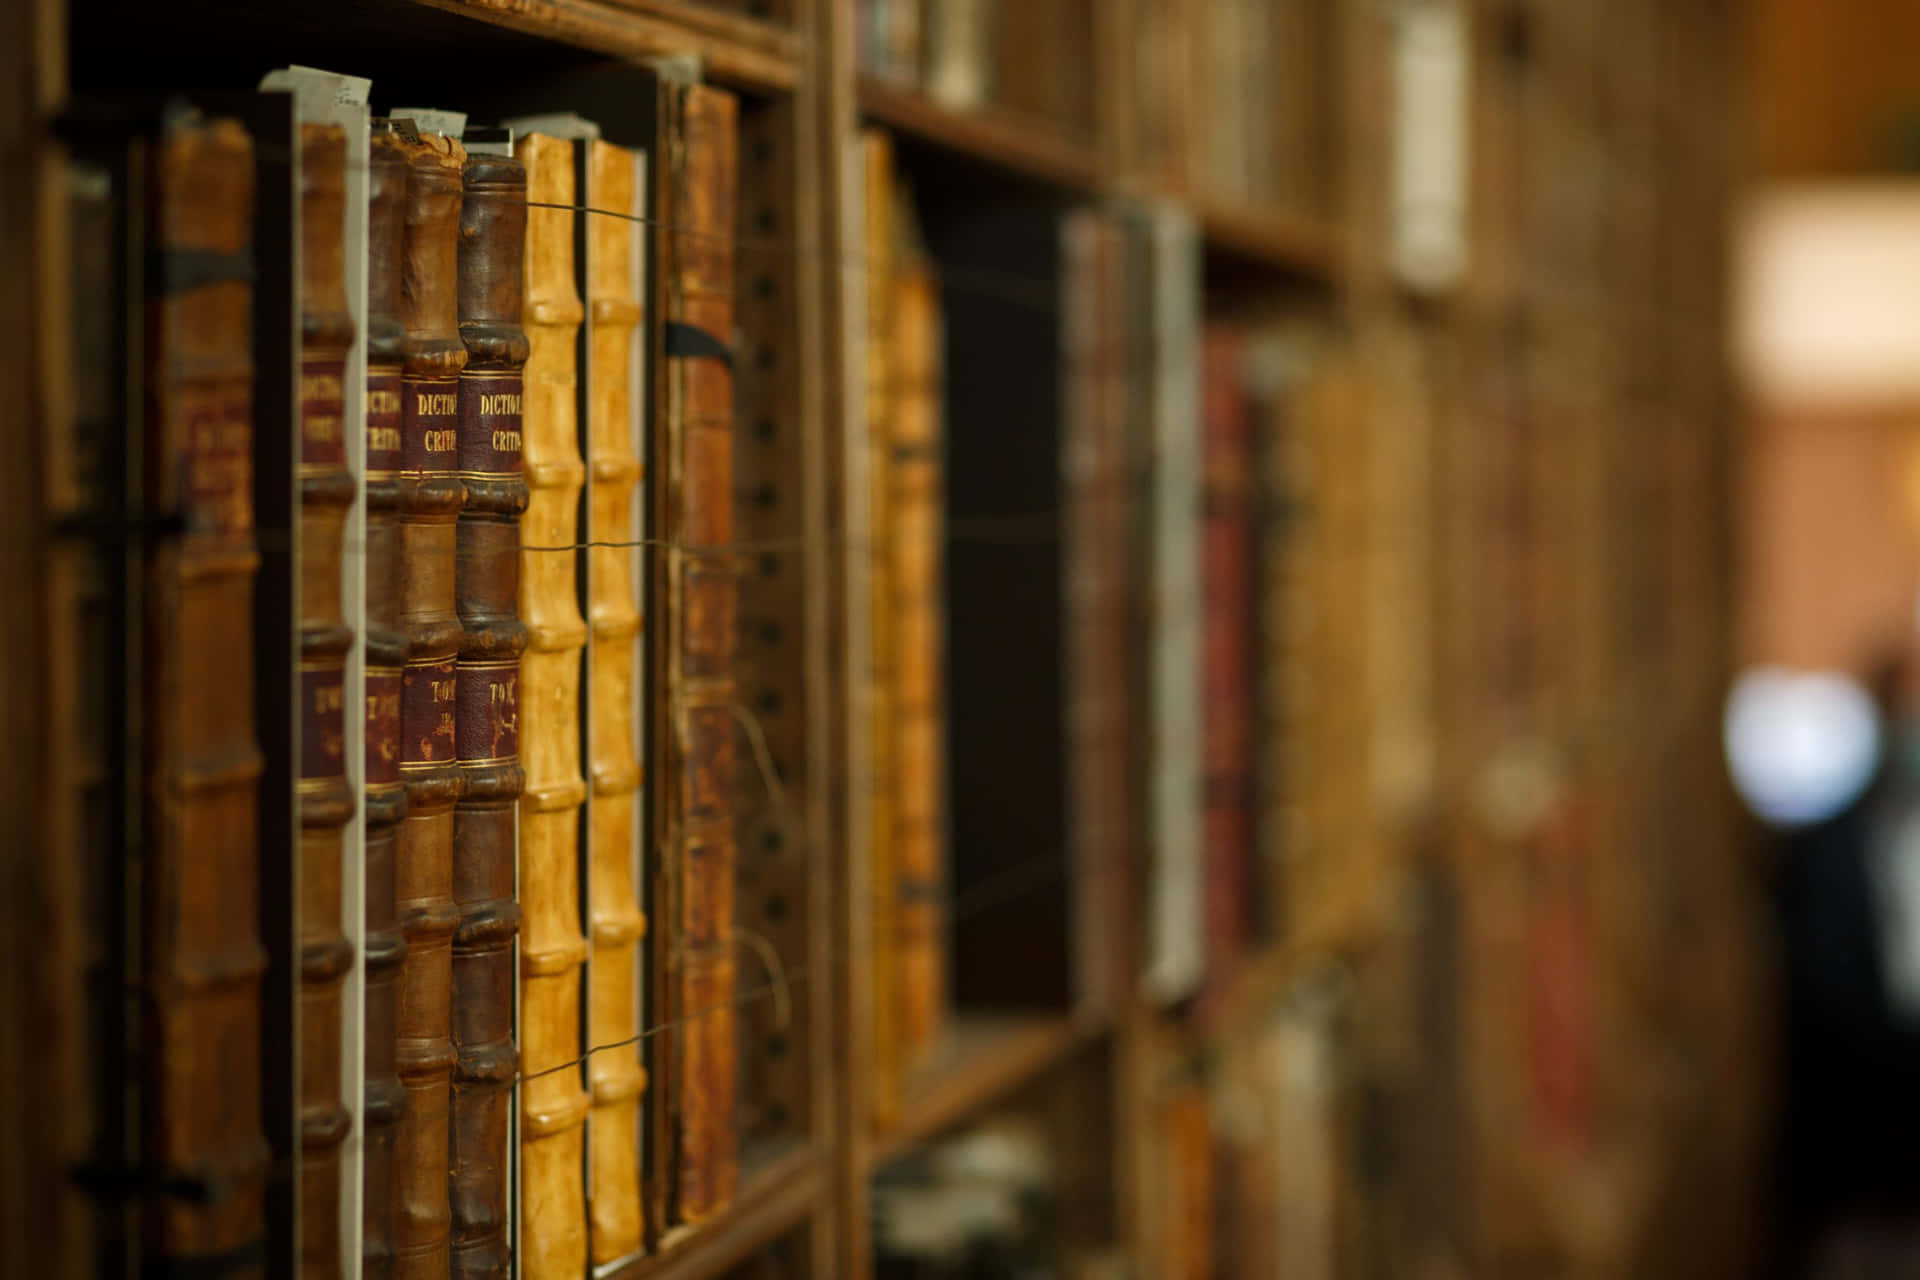 "A Glimpse of Vivid History - Inside the Chester Cathedral Library" Wallpaper